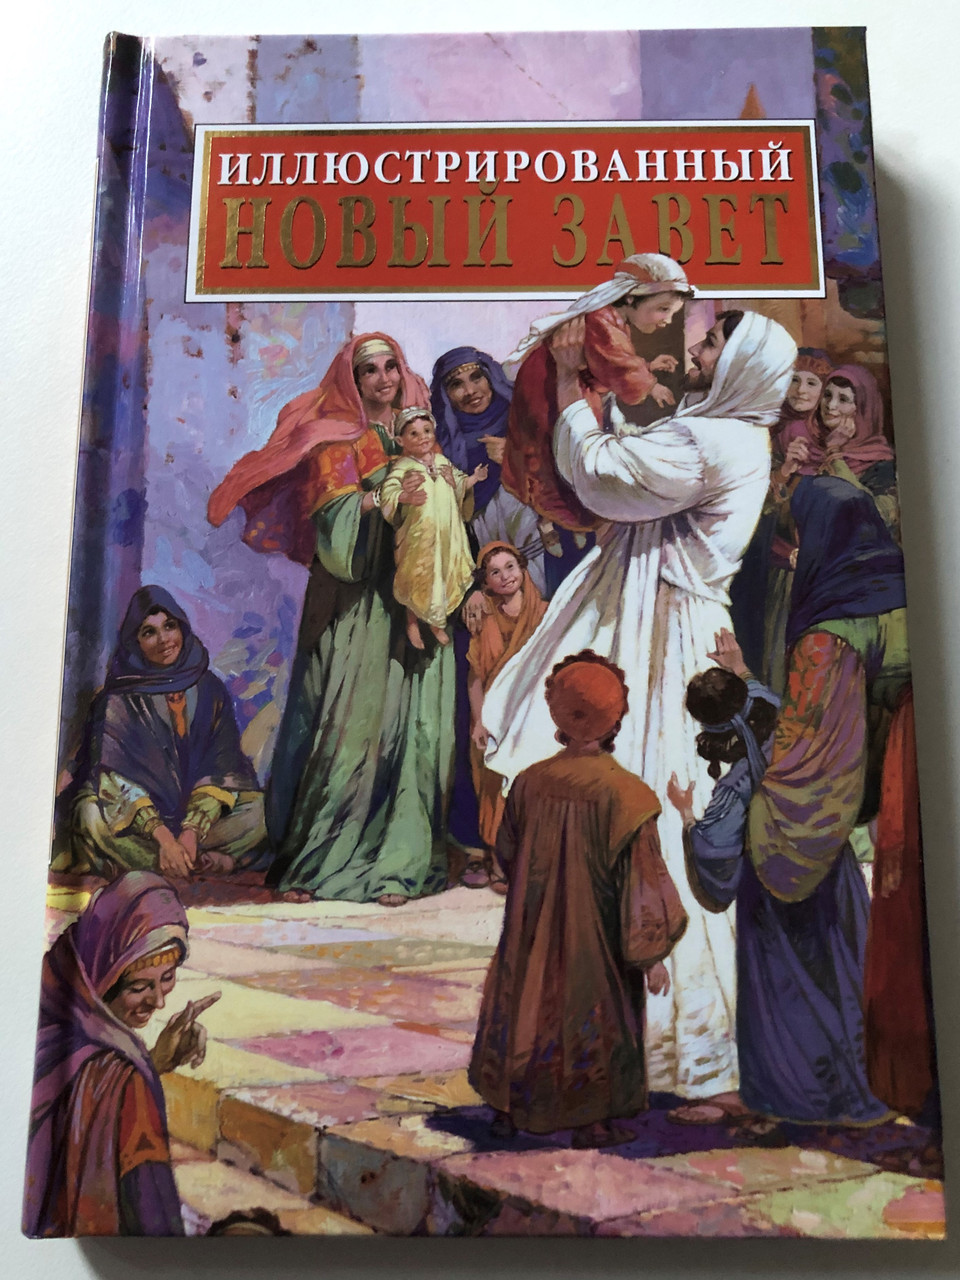 https://cdn10.bigcommerce.com/s-62bdpkt7pb/products/51203/images/260729/Russian_edition_of_The_Illustrated_New_Testament_1__05828.1670931826.1280.1280.JPG?c=2